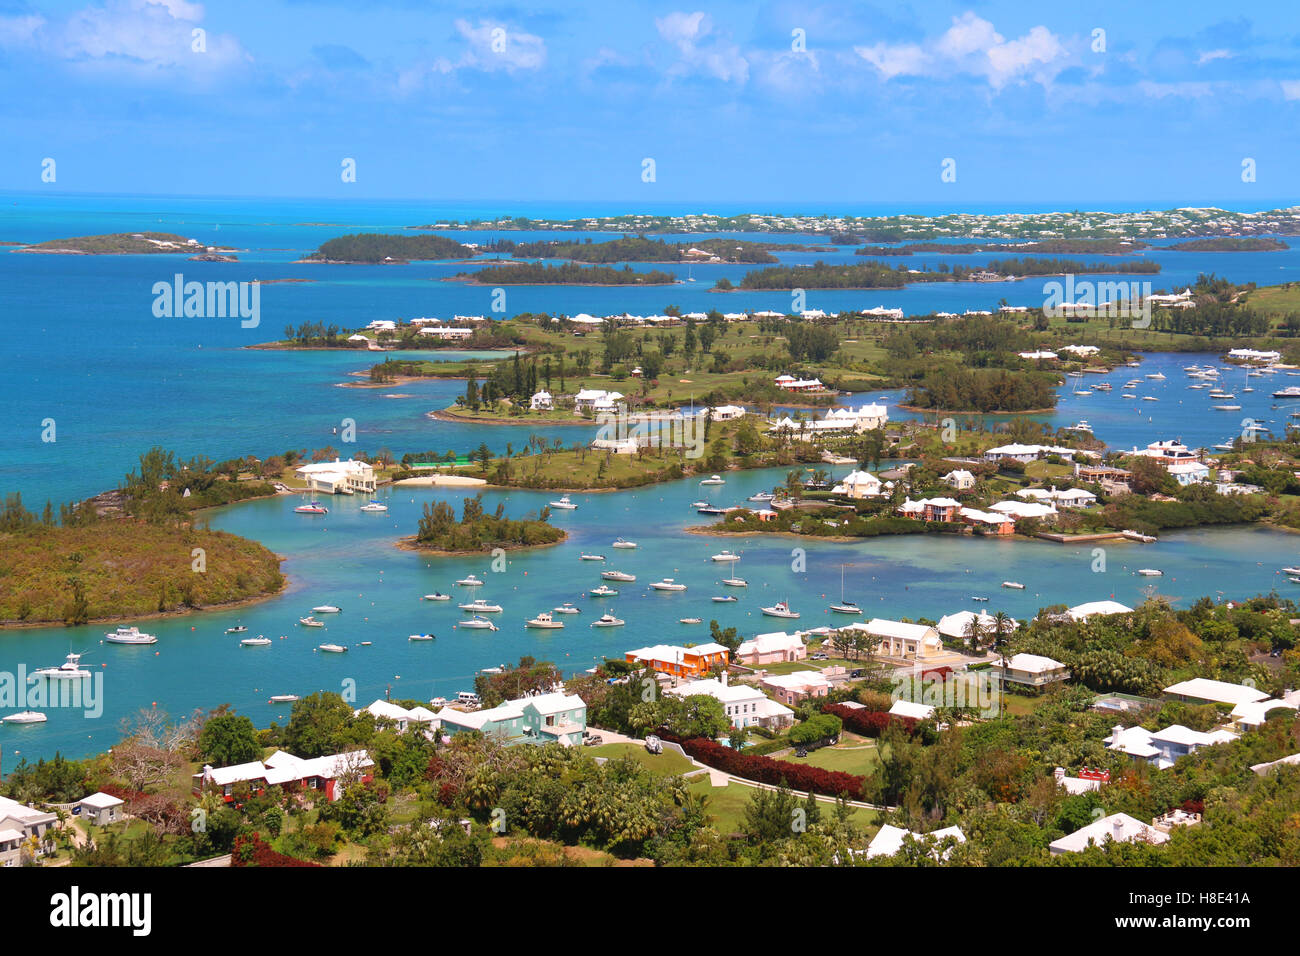 Bermuda tropical landscape view from above, St Anne's, Bermuda. Stock Photo